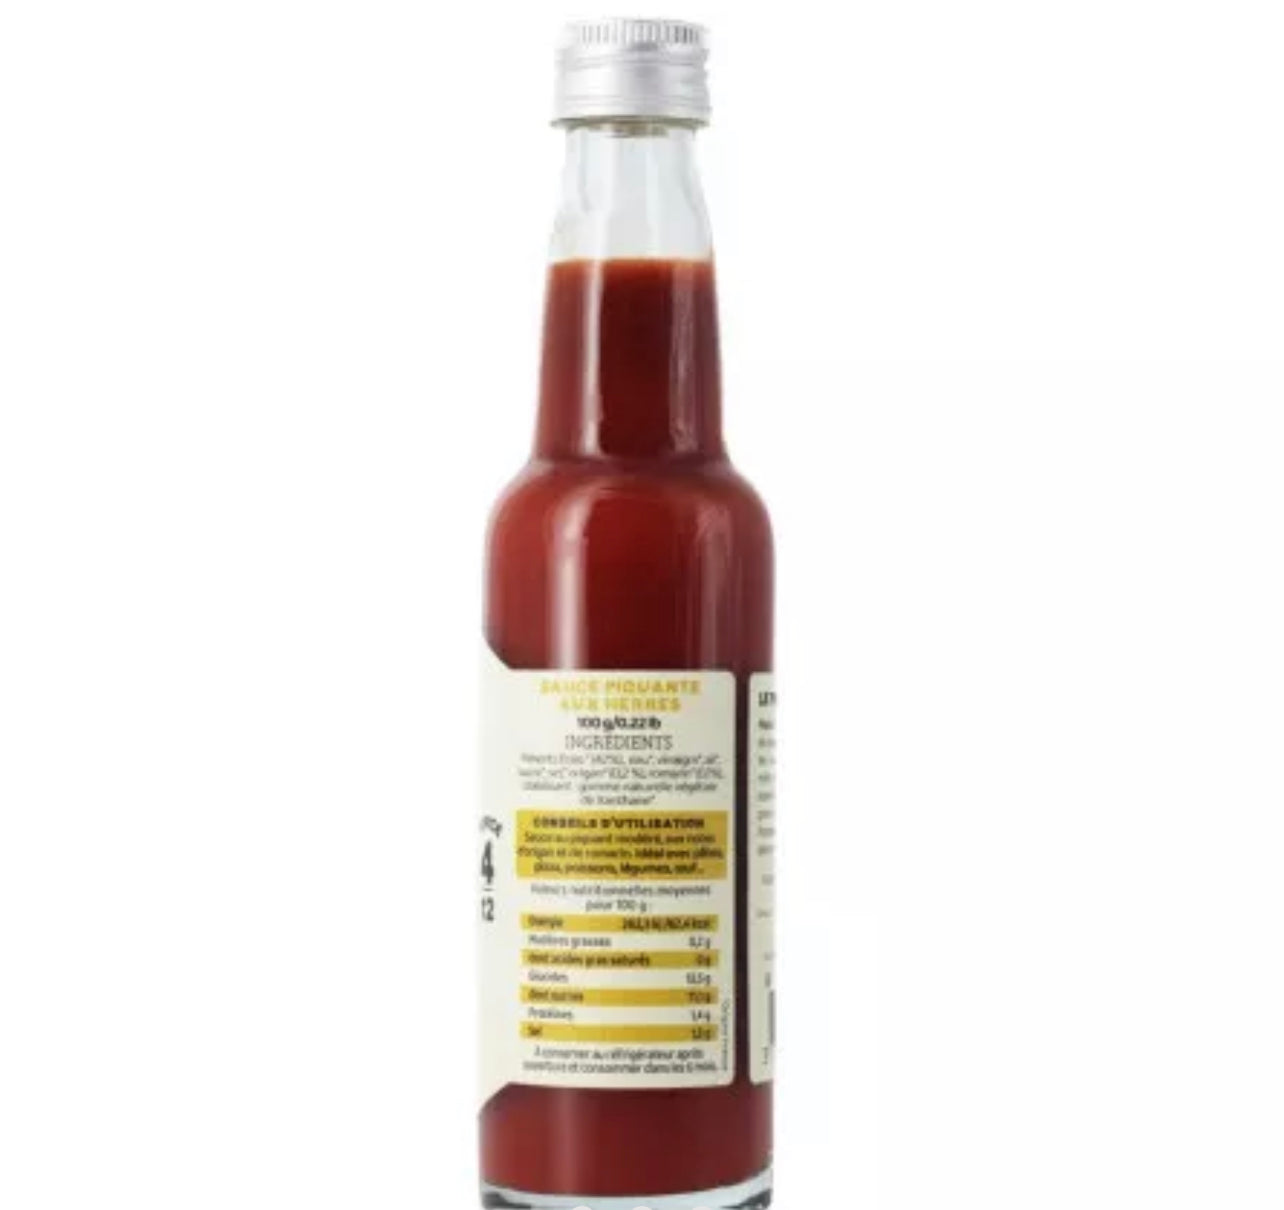 Mistral hot sauce with herbs from Provence | Strength 4/12 - 100g